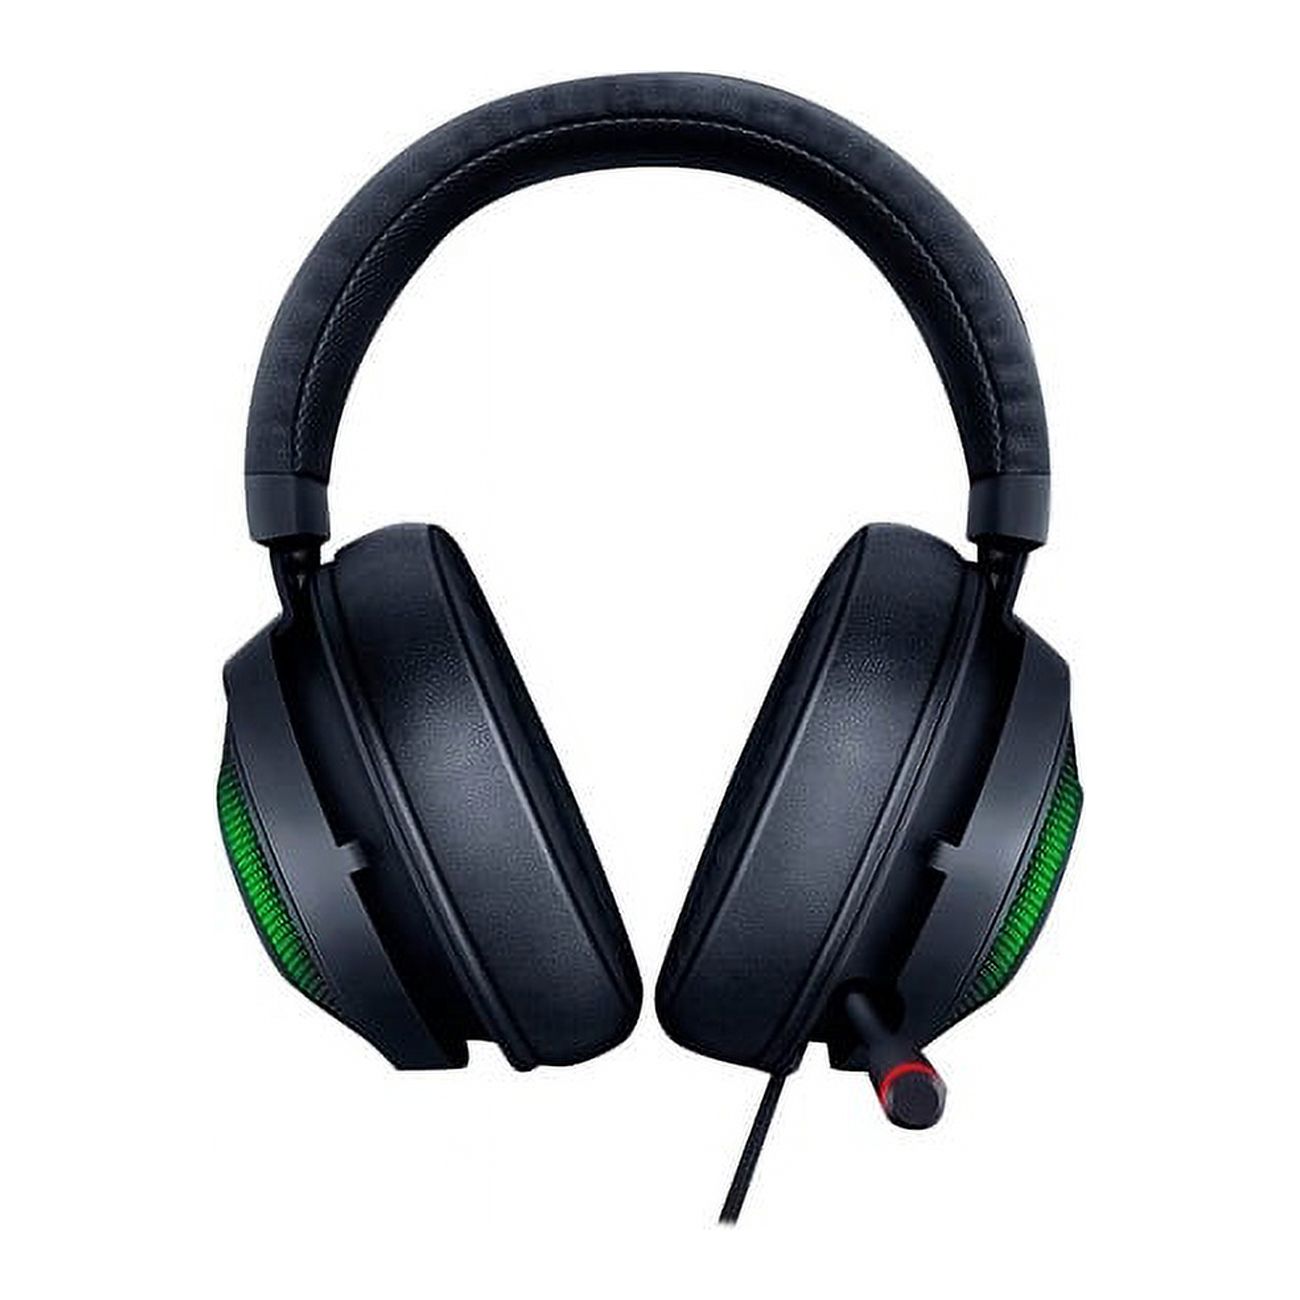 Razer Kraken Ultimate USB Surround Sound Headset with ANC Microphone - image 2 of 3